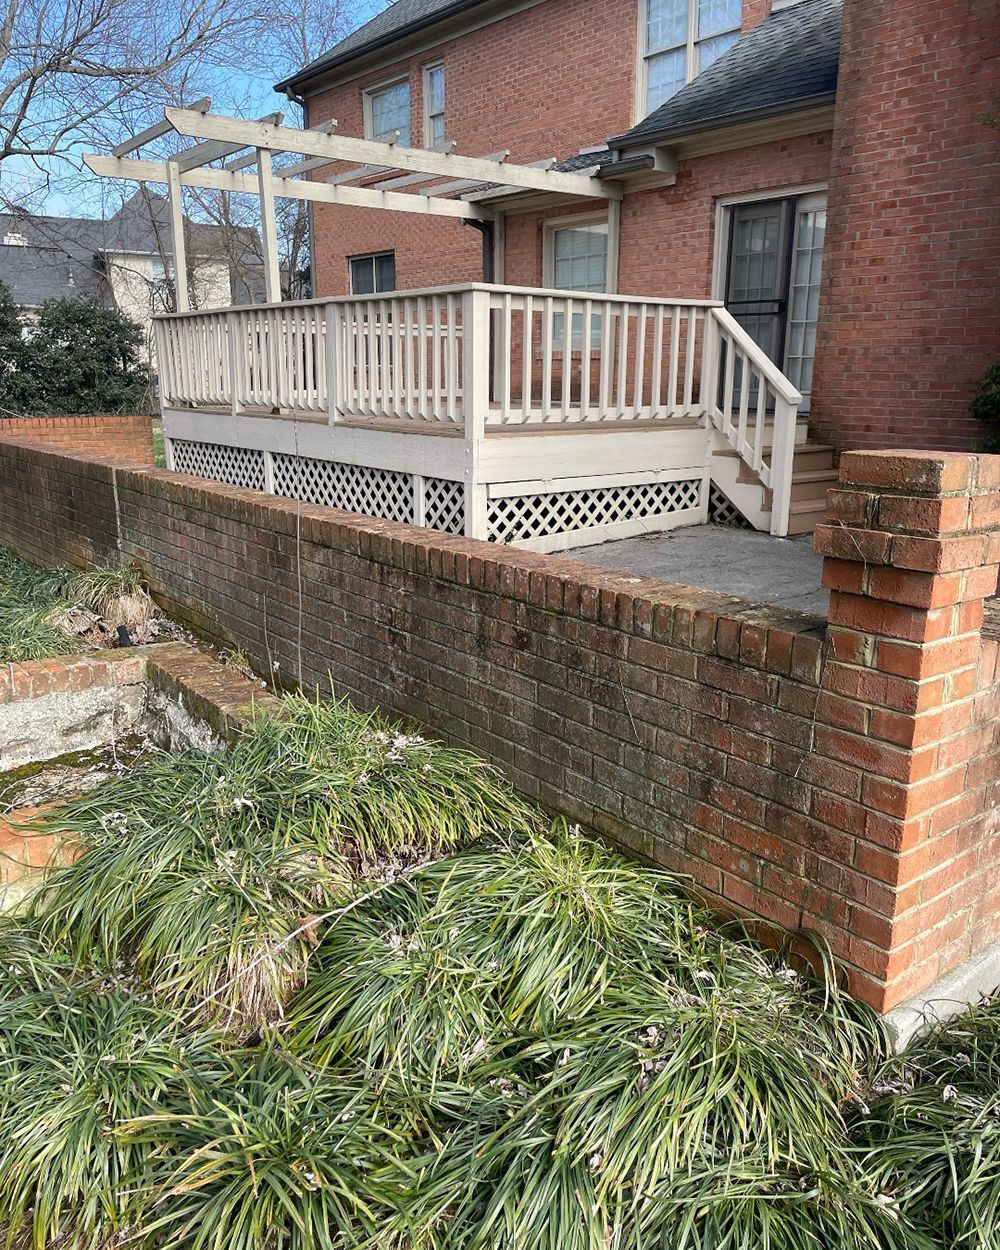 There is a deck with stairs leading up to it next to a brick wall